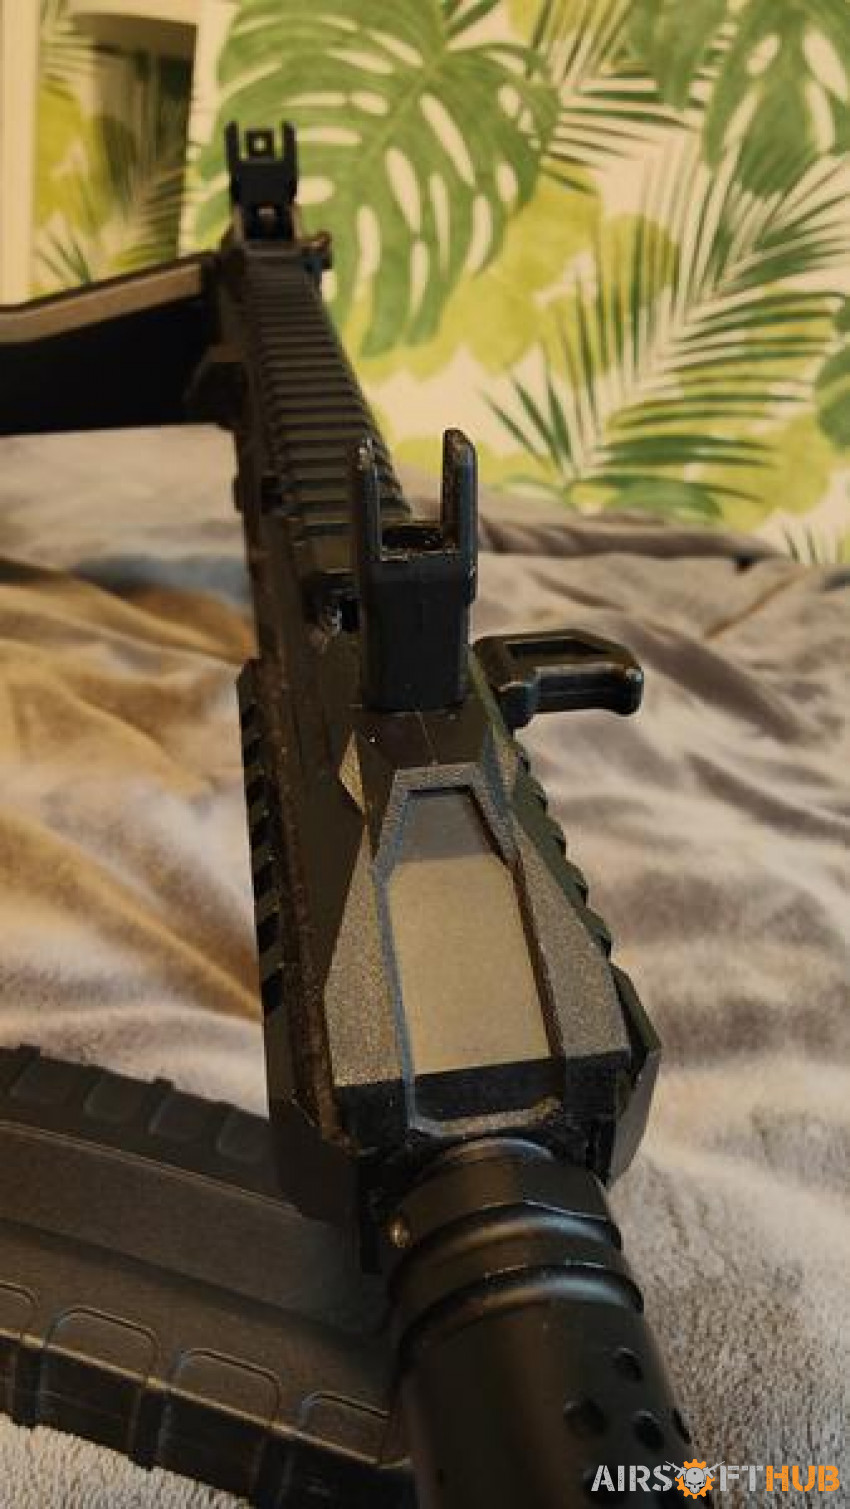 GHK 5 GBBR - Lowered price - Used airsoft equipment